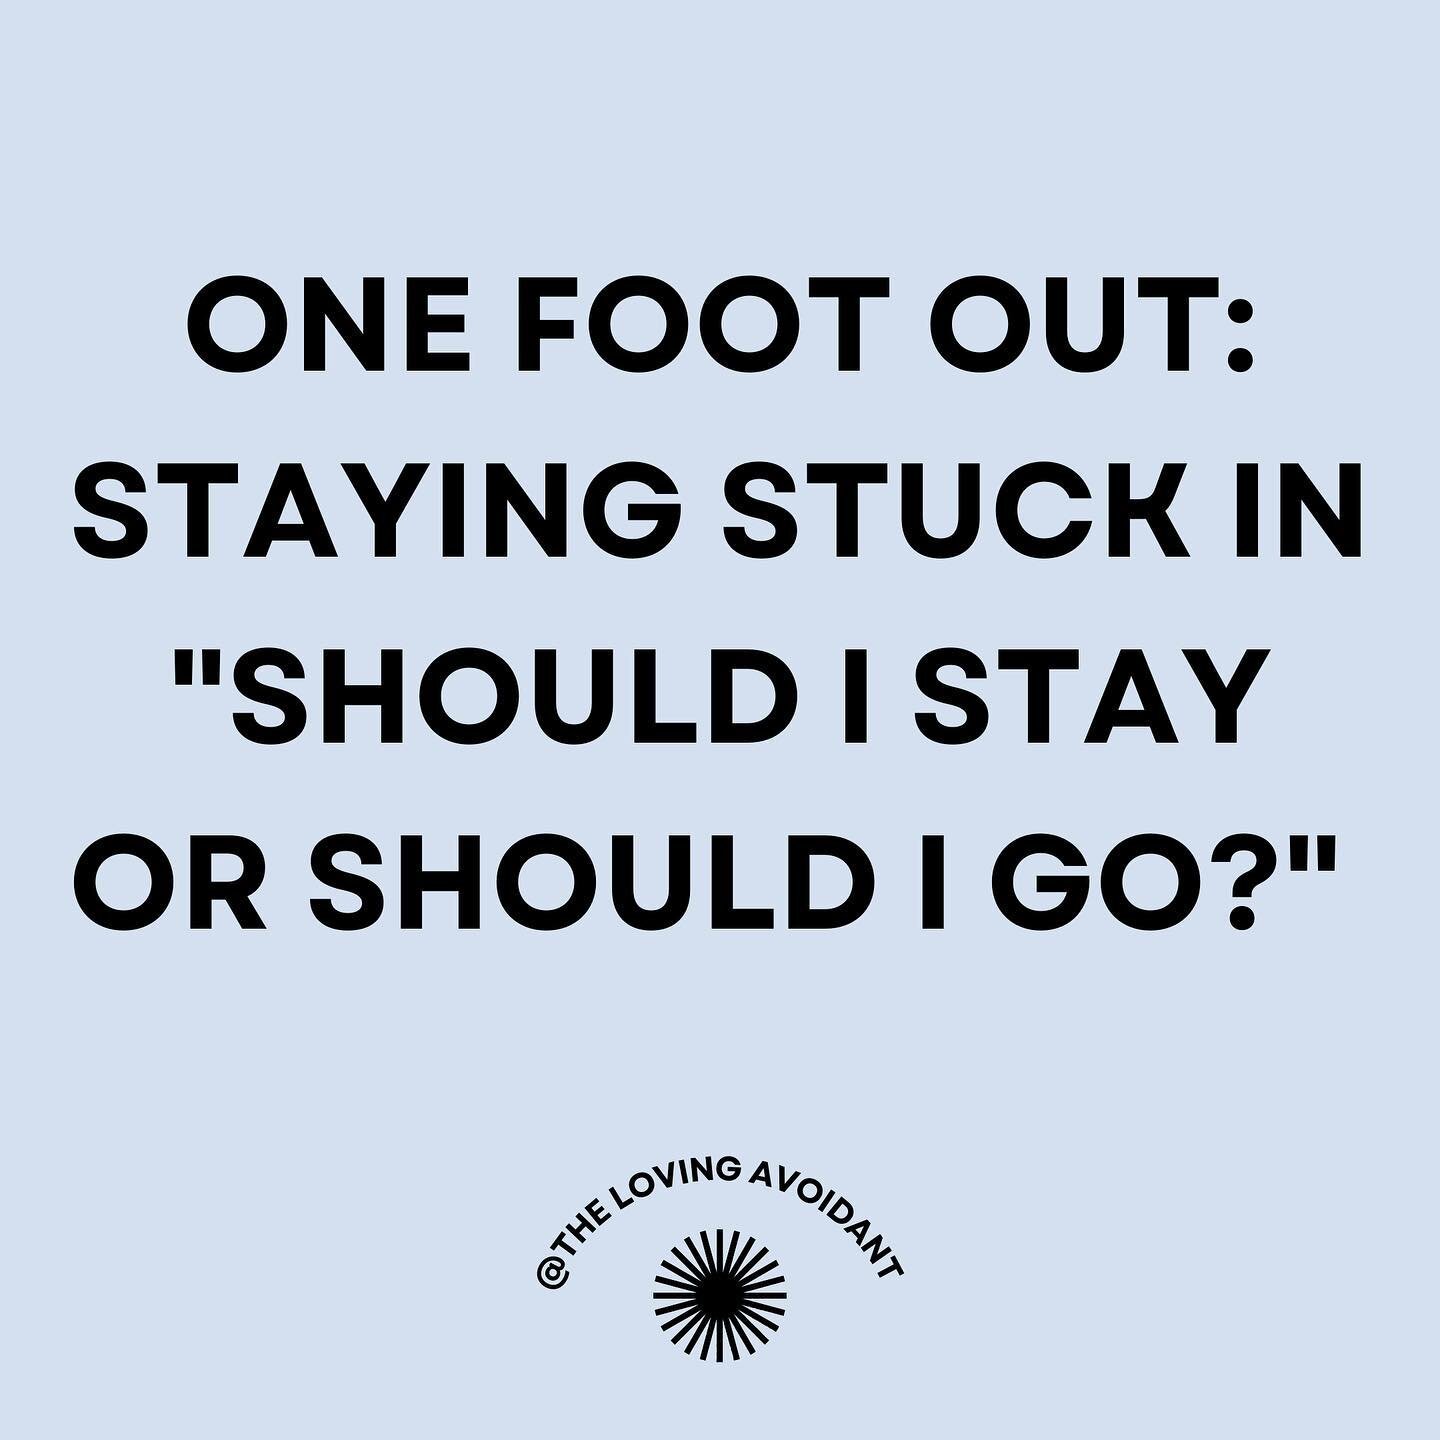 ONE FOOT OUT: STAYING STUCK IN &quot;SHOULD I STAY OR SHOULD I GO?&quot; 

Probably everyone has typed &quot;when to break up&quot; into a search bar in a desperate attempt for clearcut, communal answers to an inherently tangled and lonely query. 

T